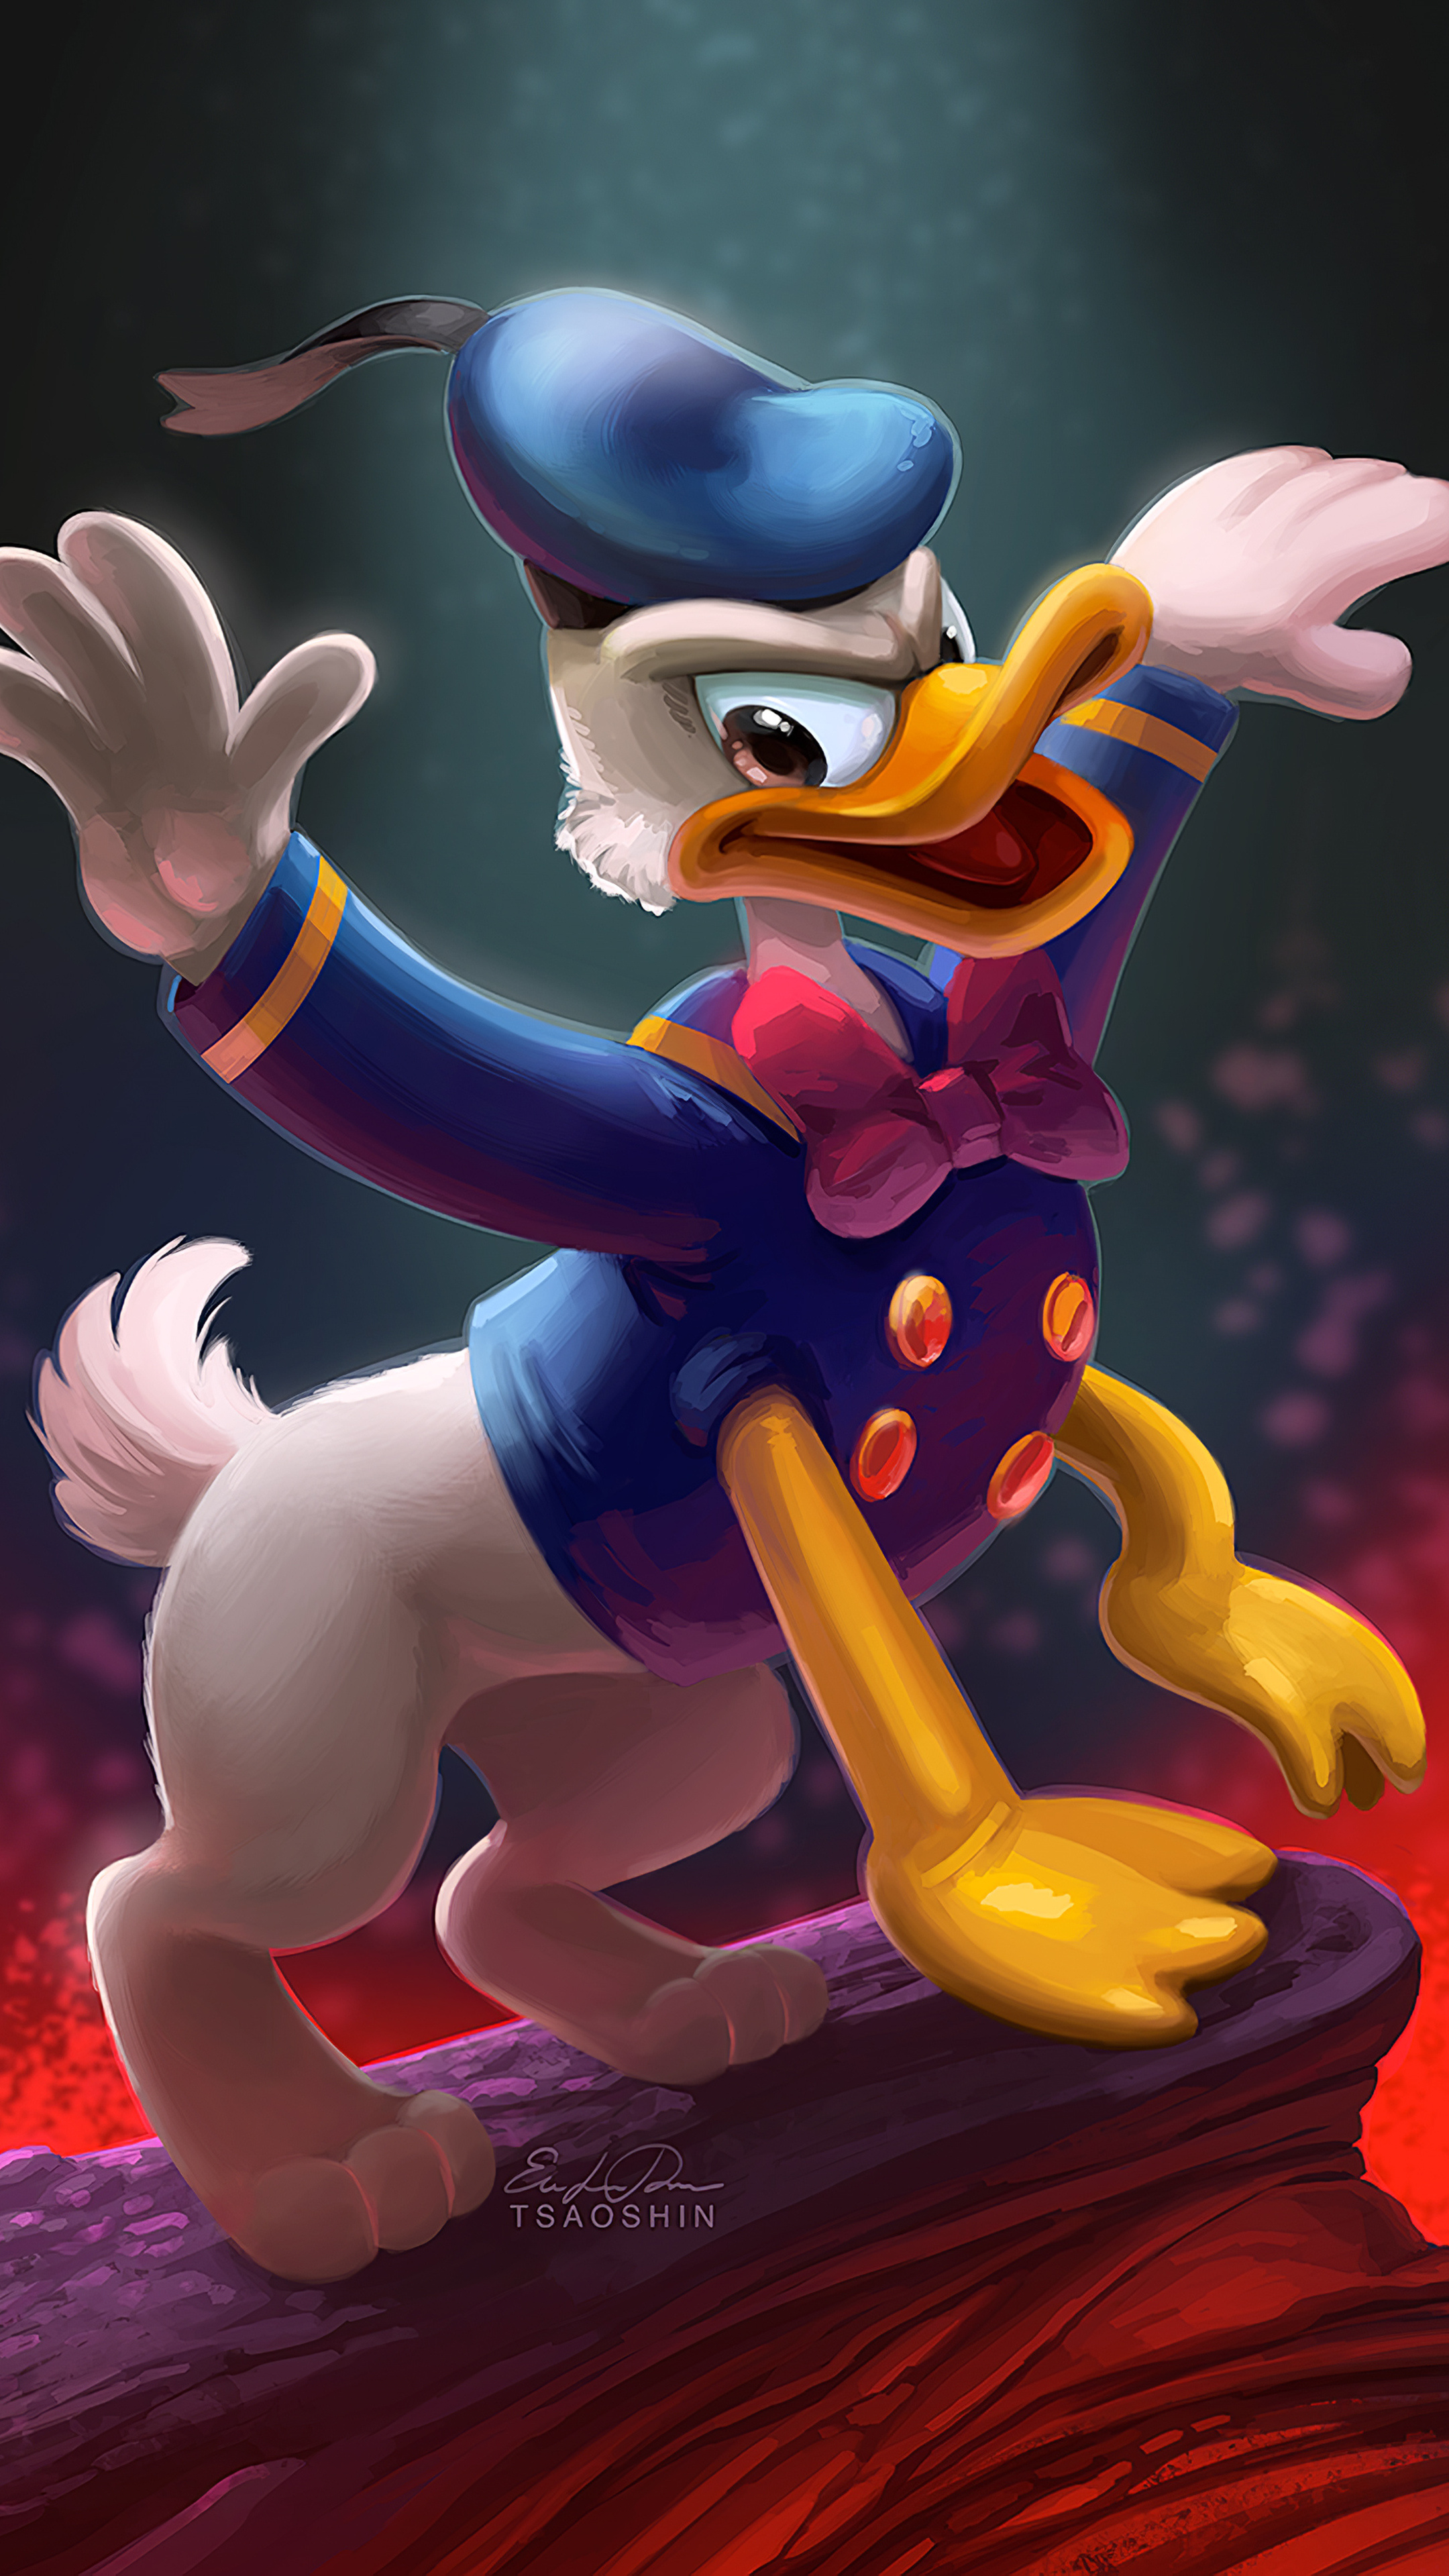 Donald Duck: Included in TV Guide's list of the 50 greatest cartoon characters of all time in 2002. 2160x3840 4K Wallpaper.